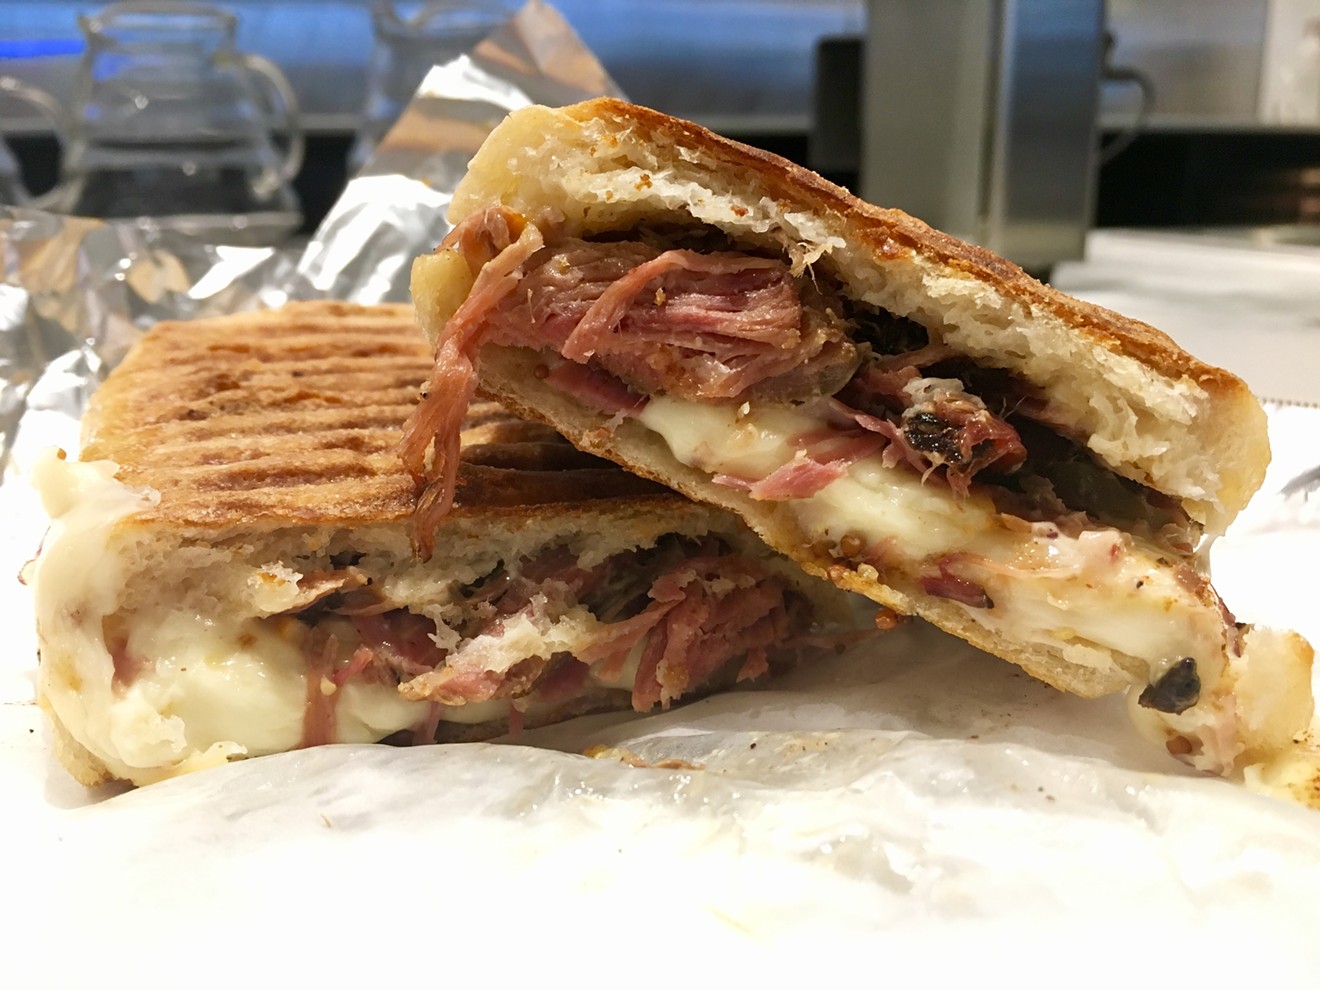 A Texas spin on the Cuban, with Pecan Lodge pork, Tasso ham, Muenster, house pickles, whole grain mustard at Civil Pour ($11).